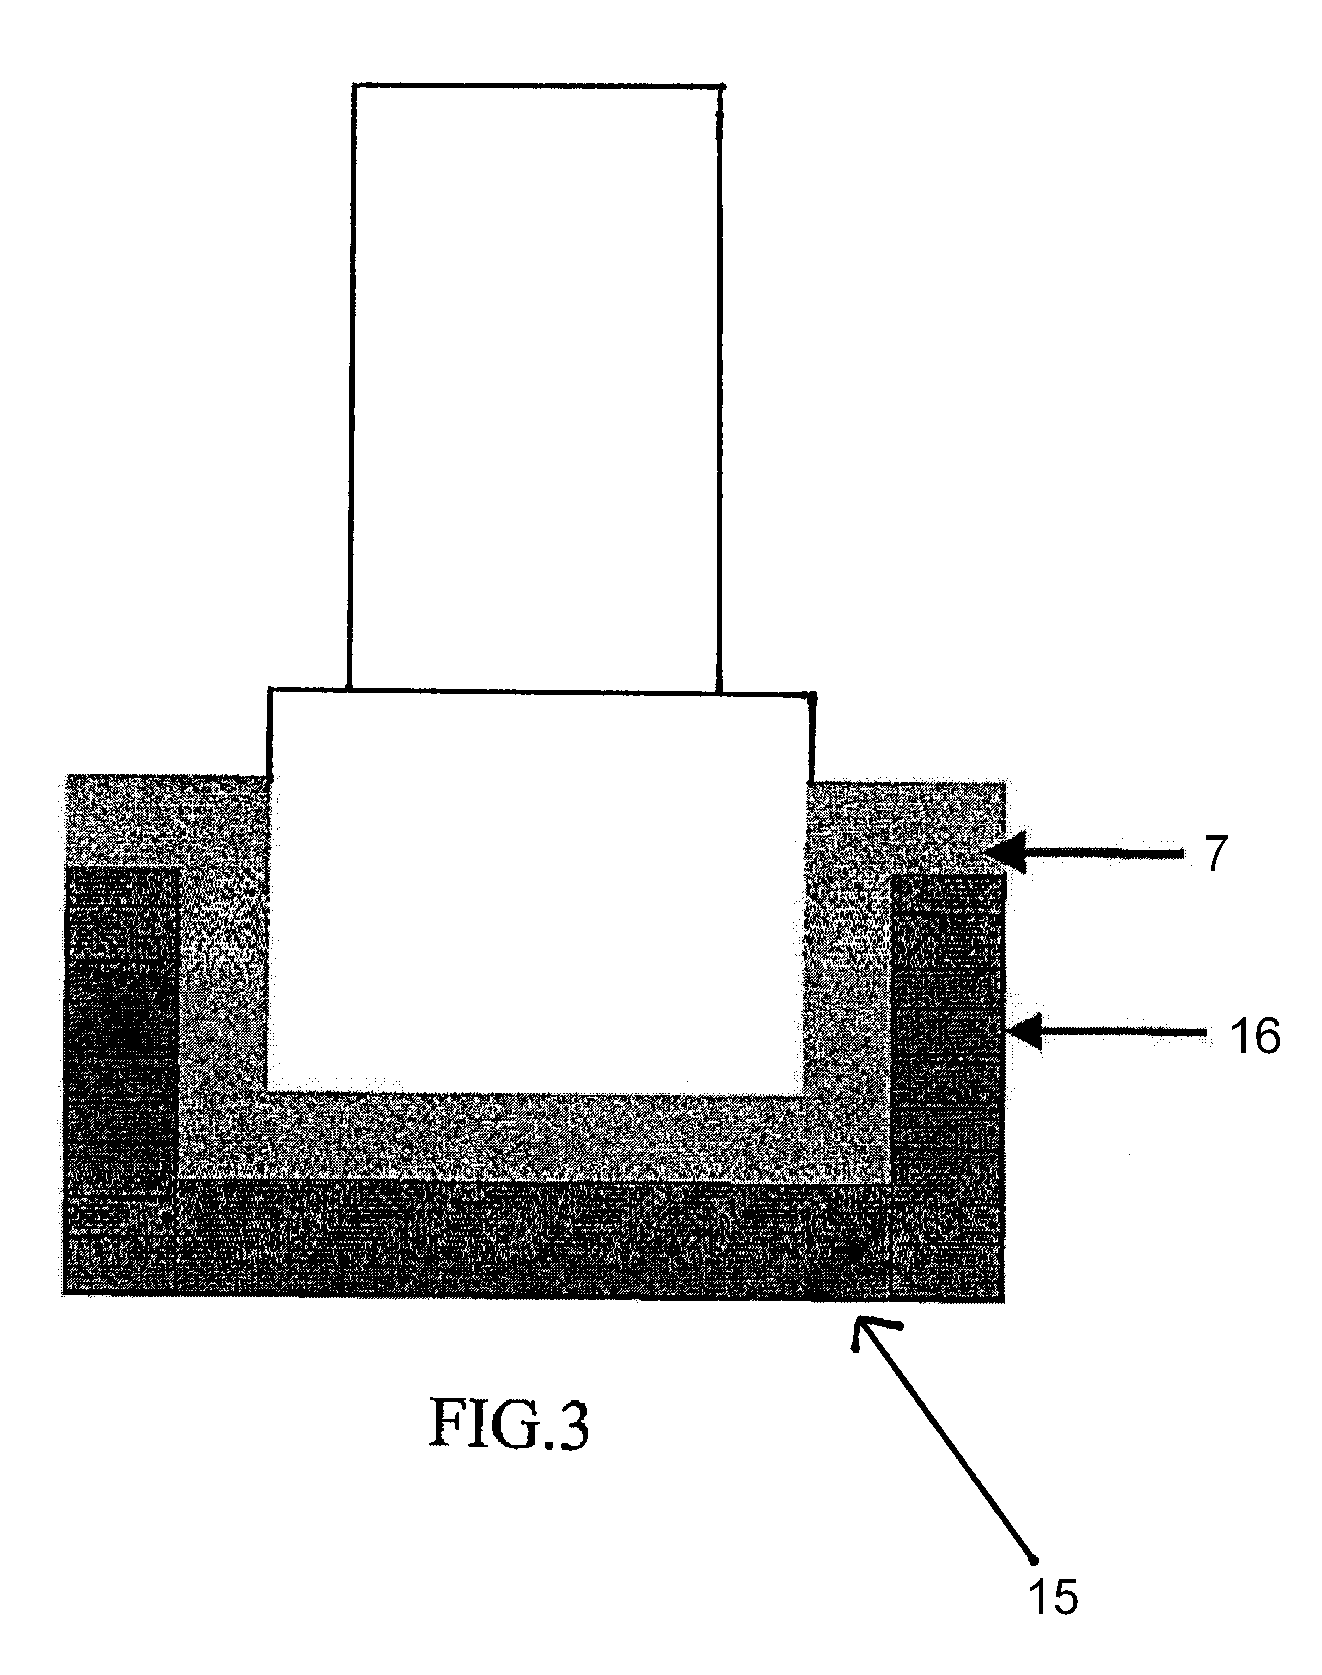 Electrical devices and methods of charging